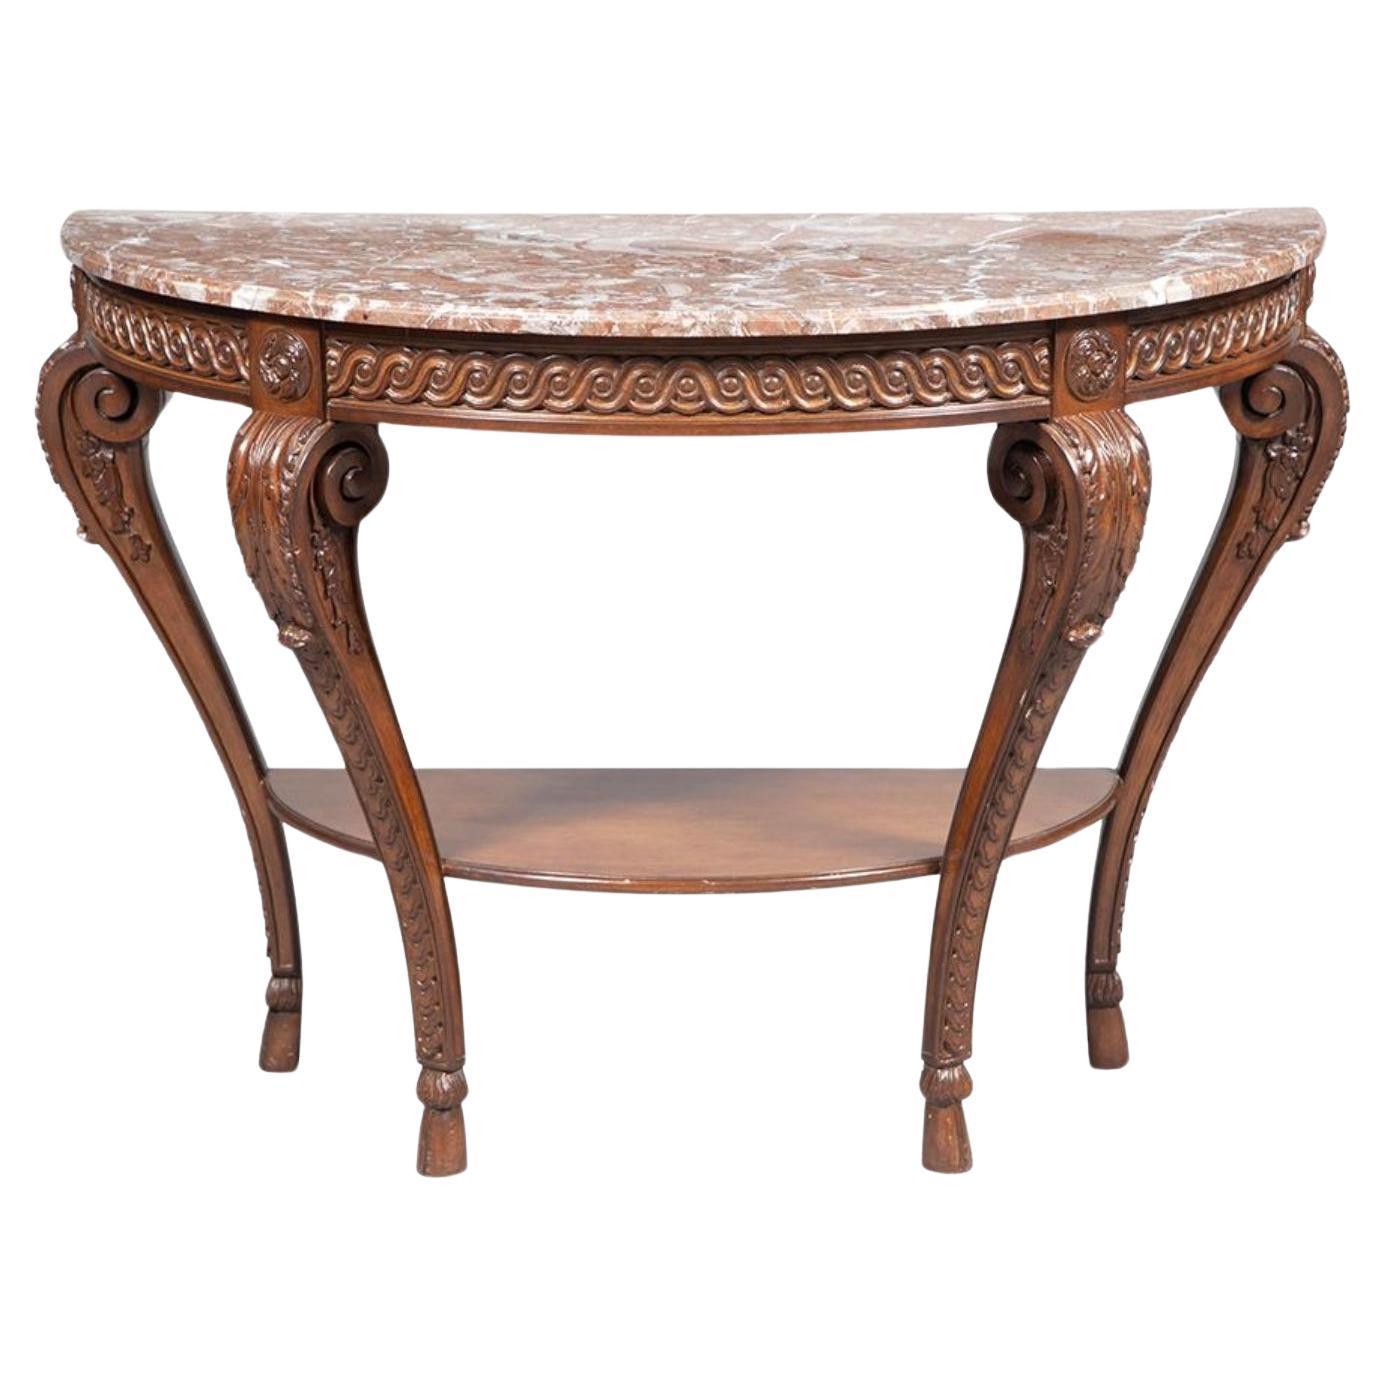  Louis XVI Style Walnut Framed Marble Top Demilune Console Table For Sale